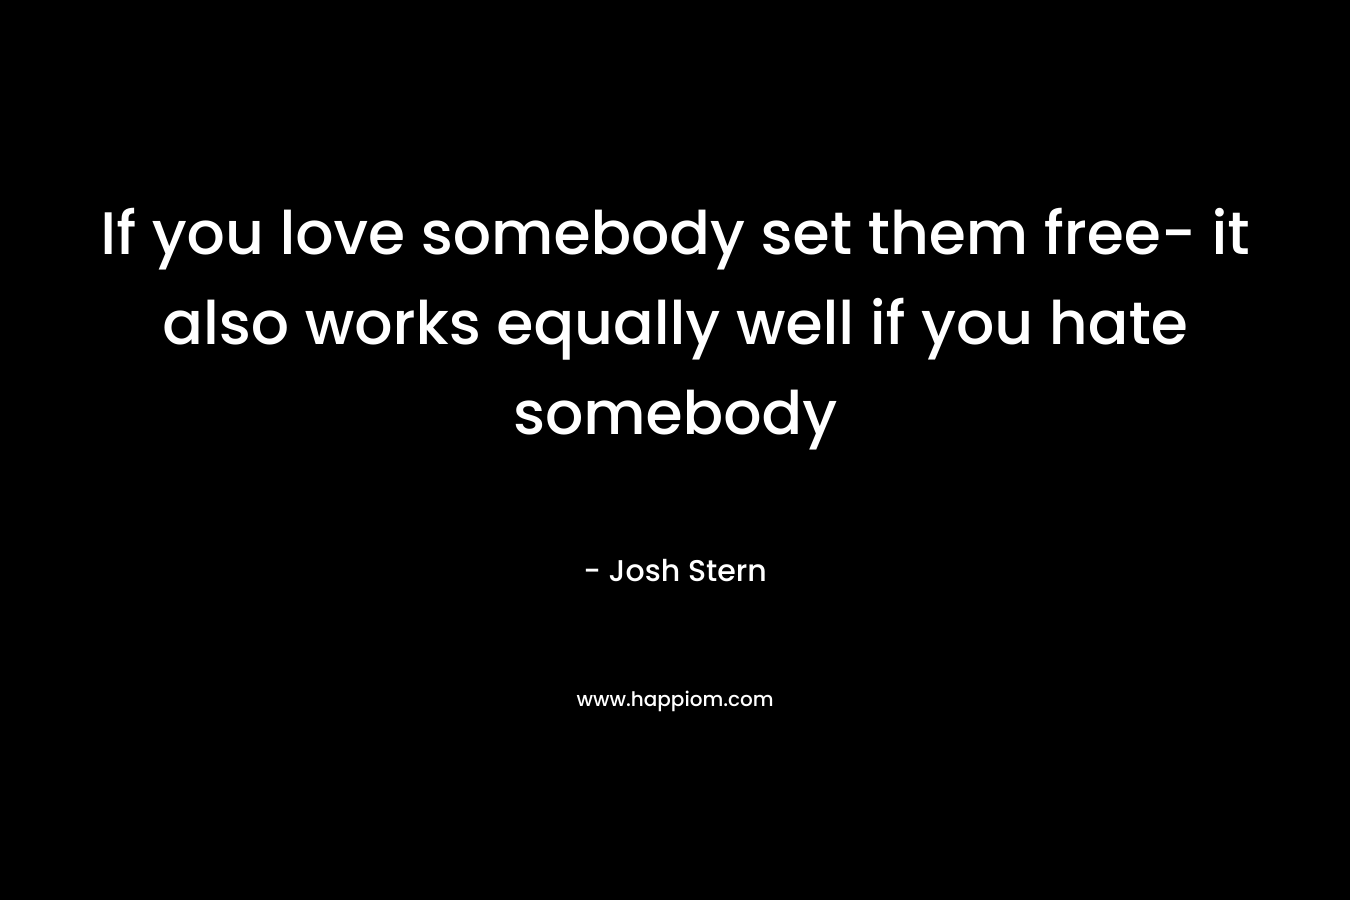 If you love somebody set them free- it also works equally well if you hate somebody